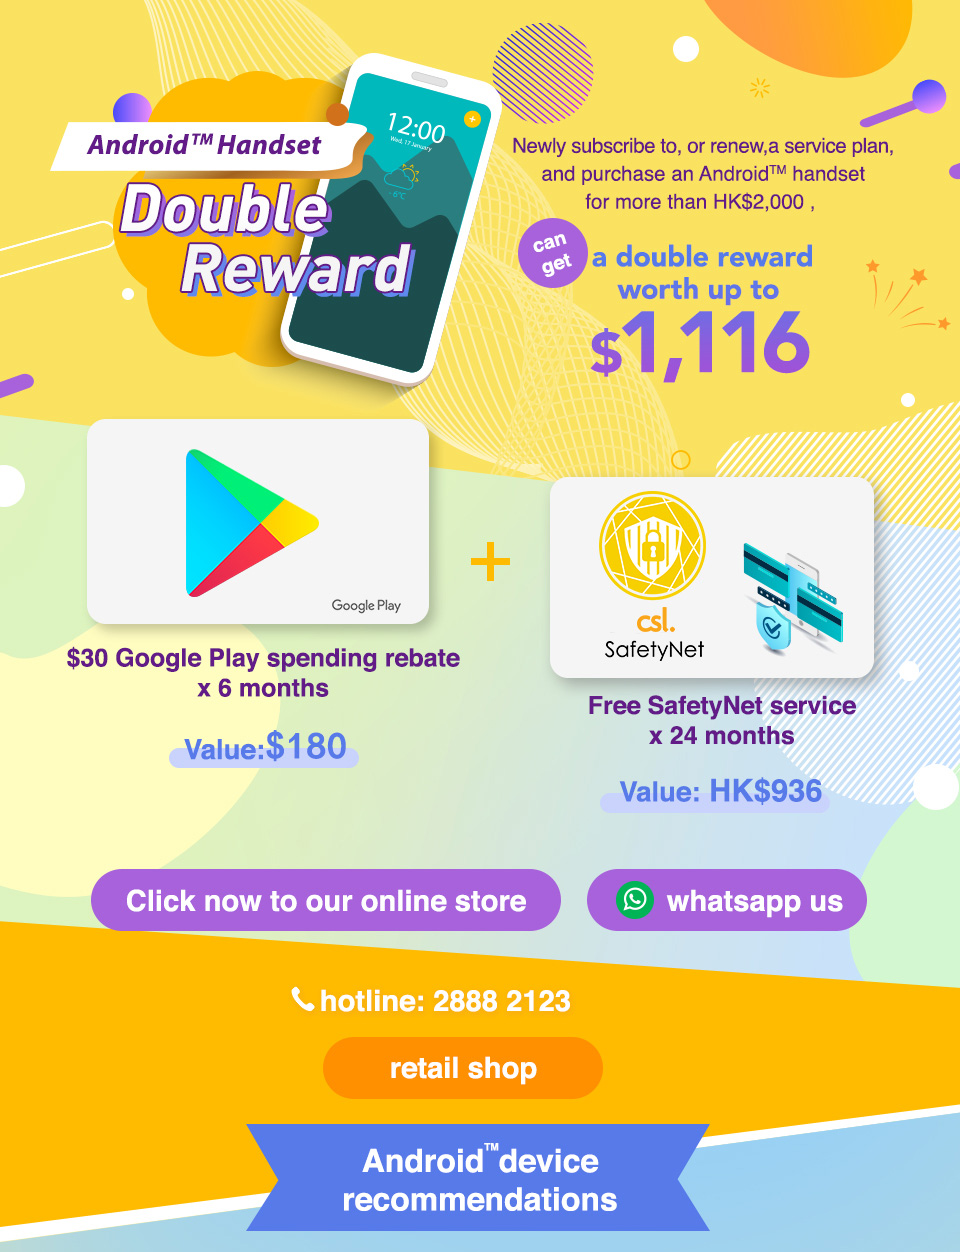 android-handset-double-reward